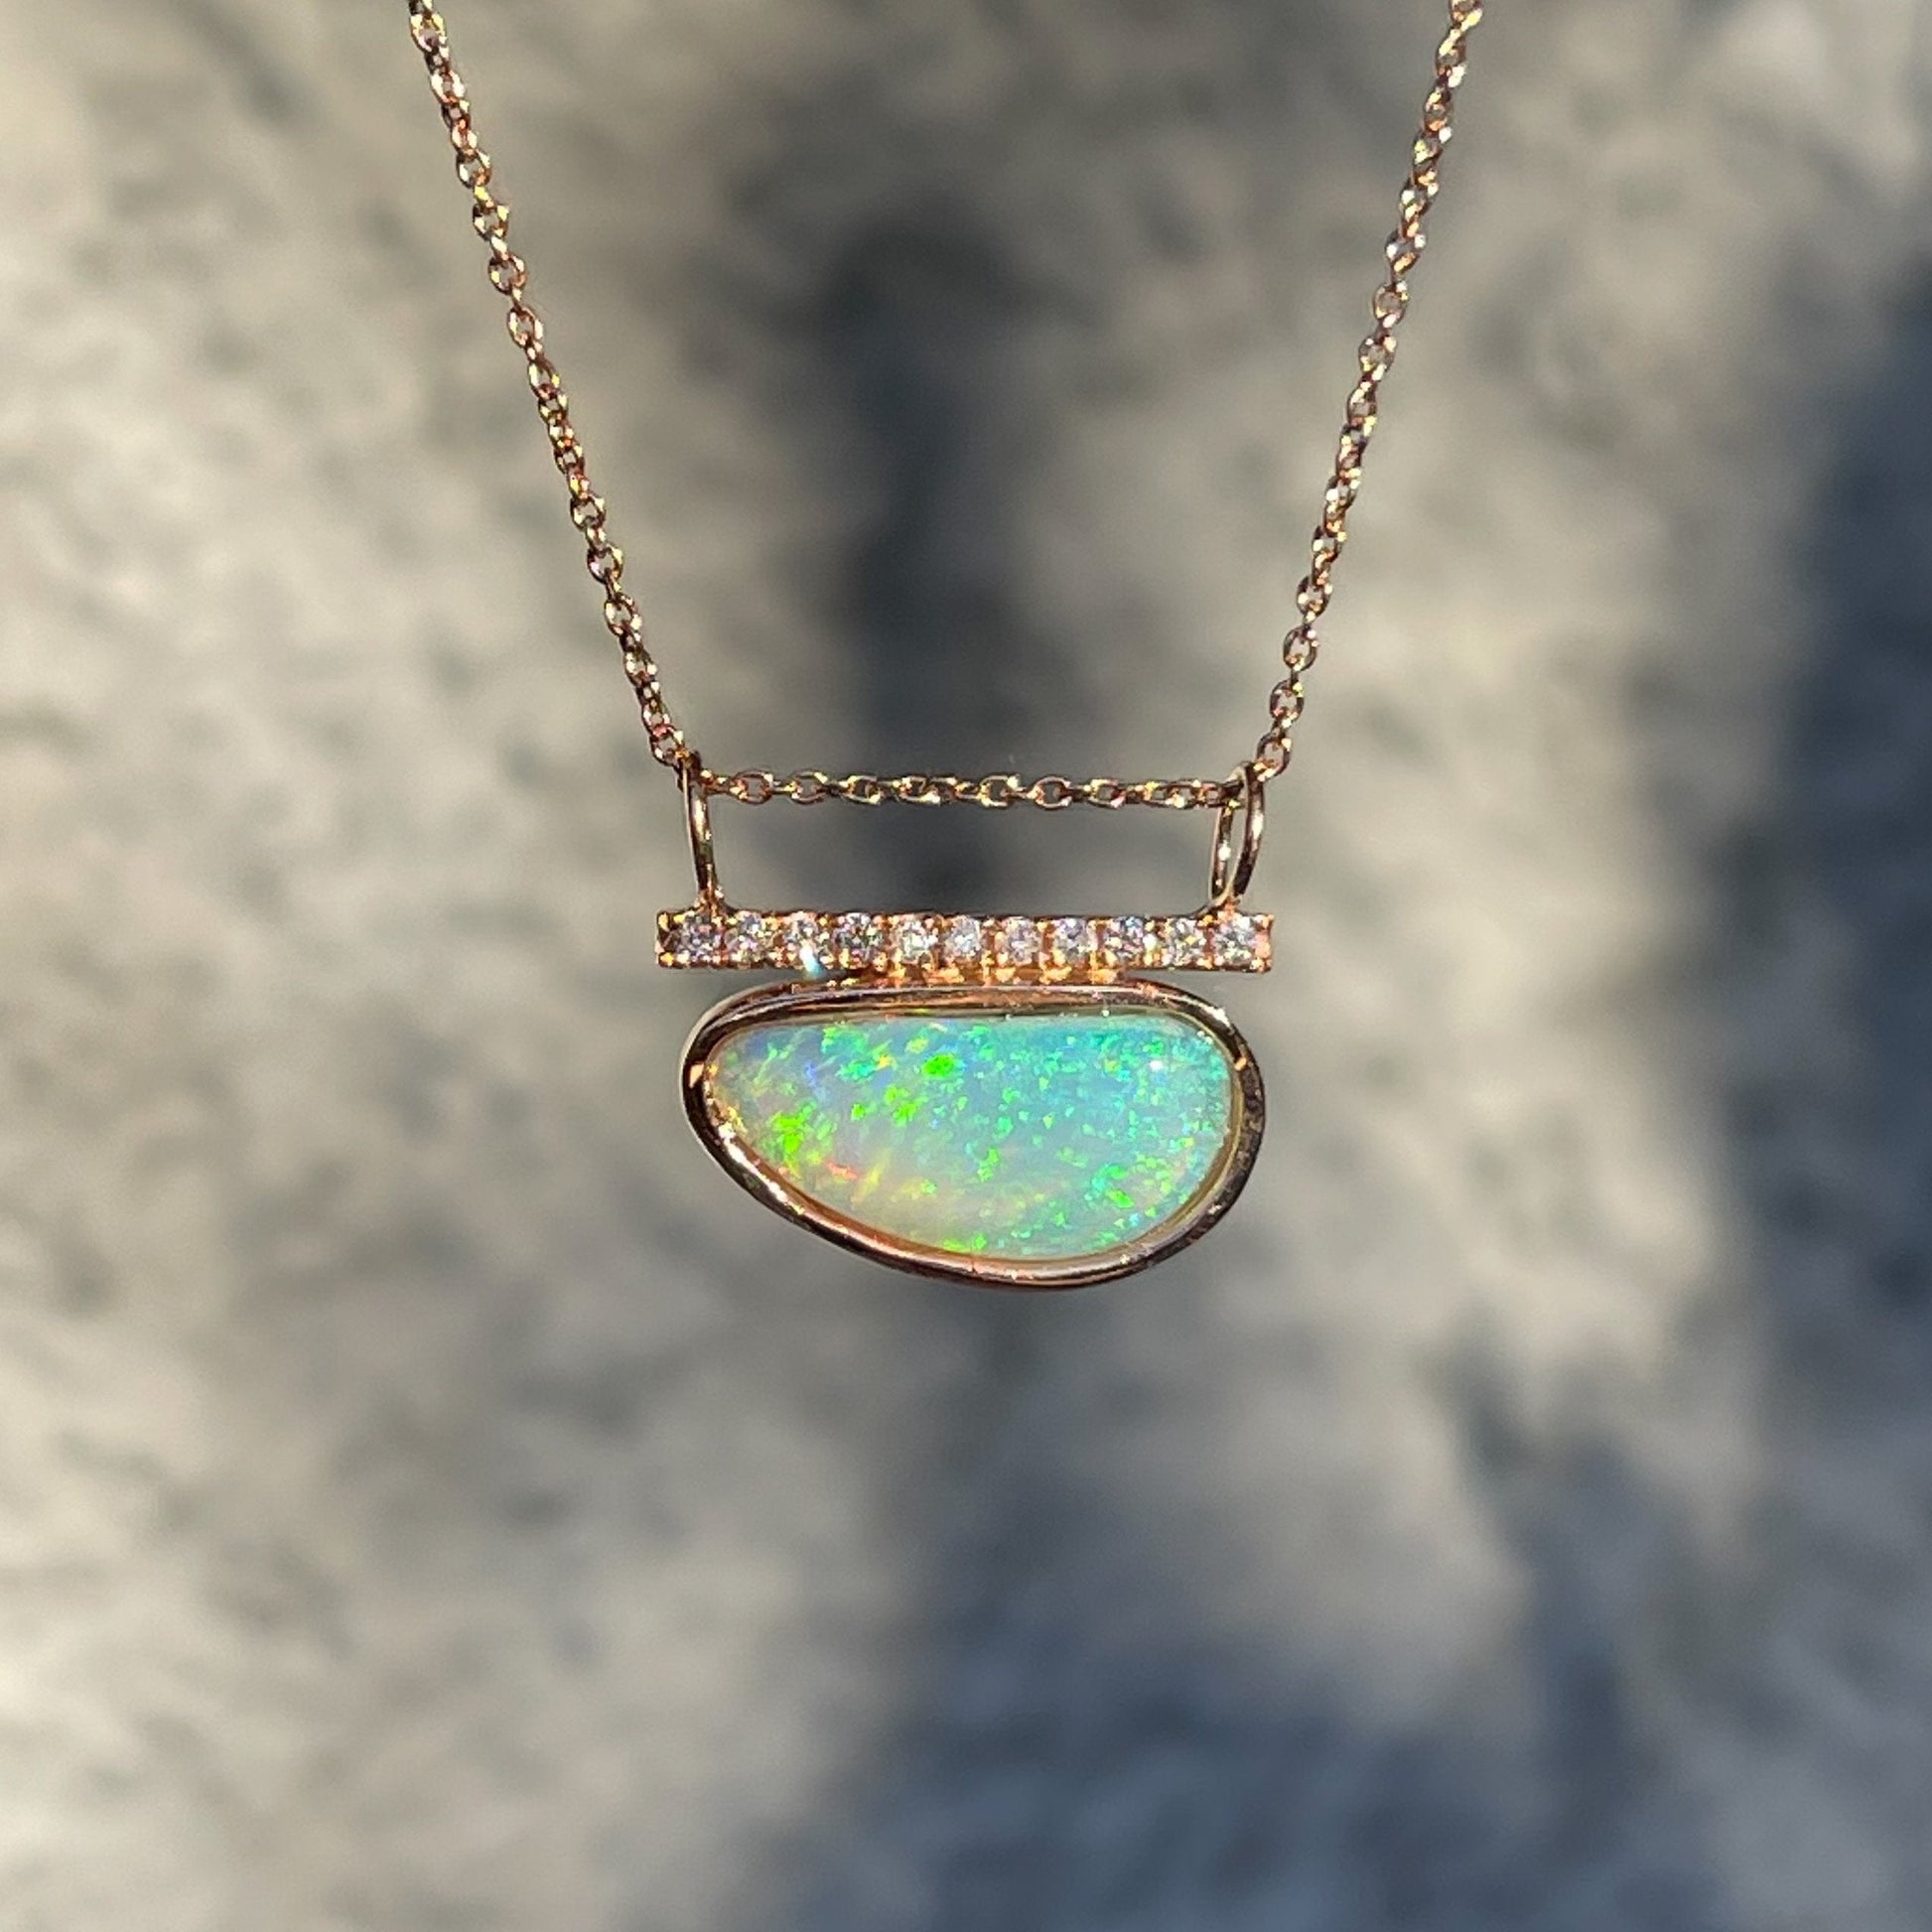 Green opal necklace by NIXIN Jewelry in front of grey wall